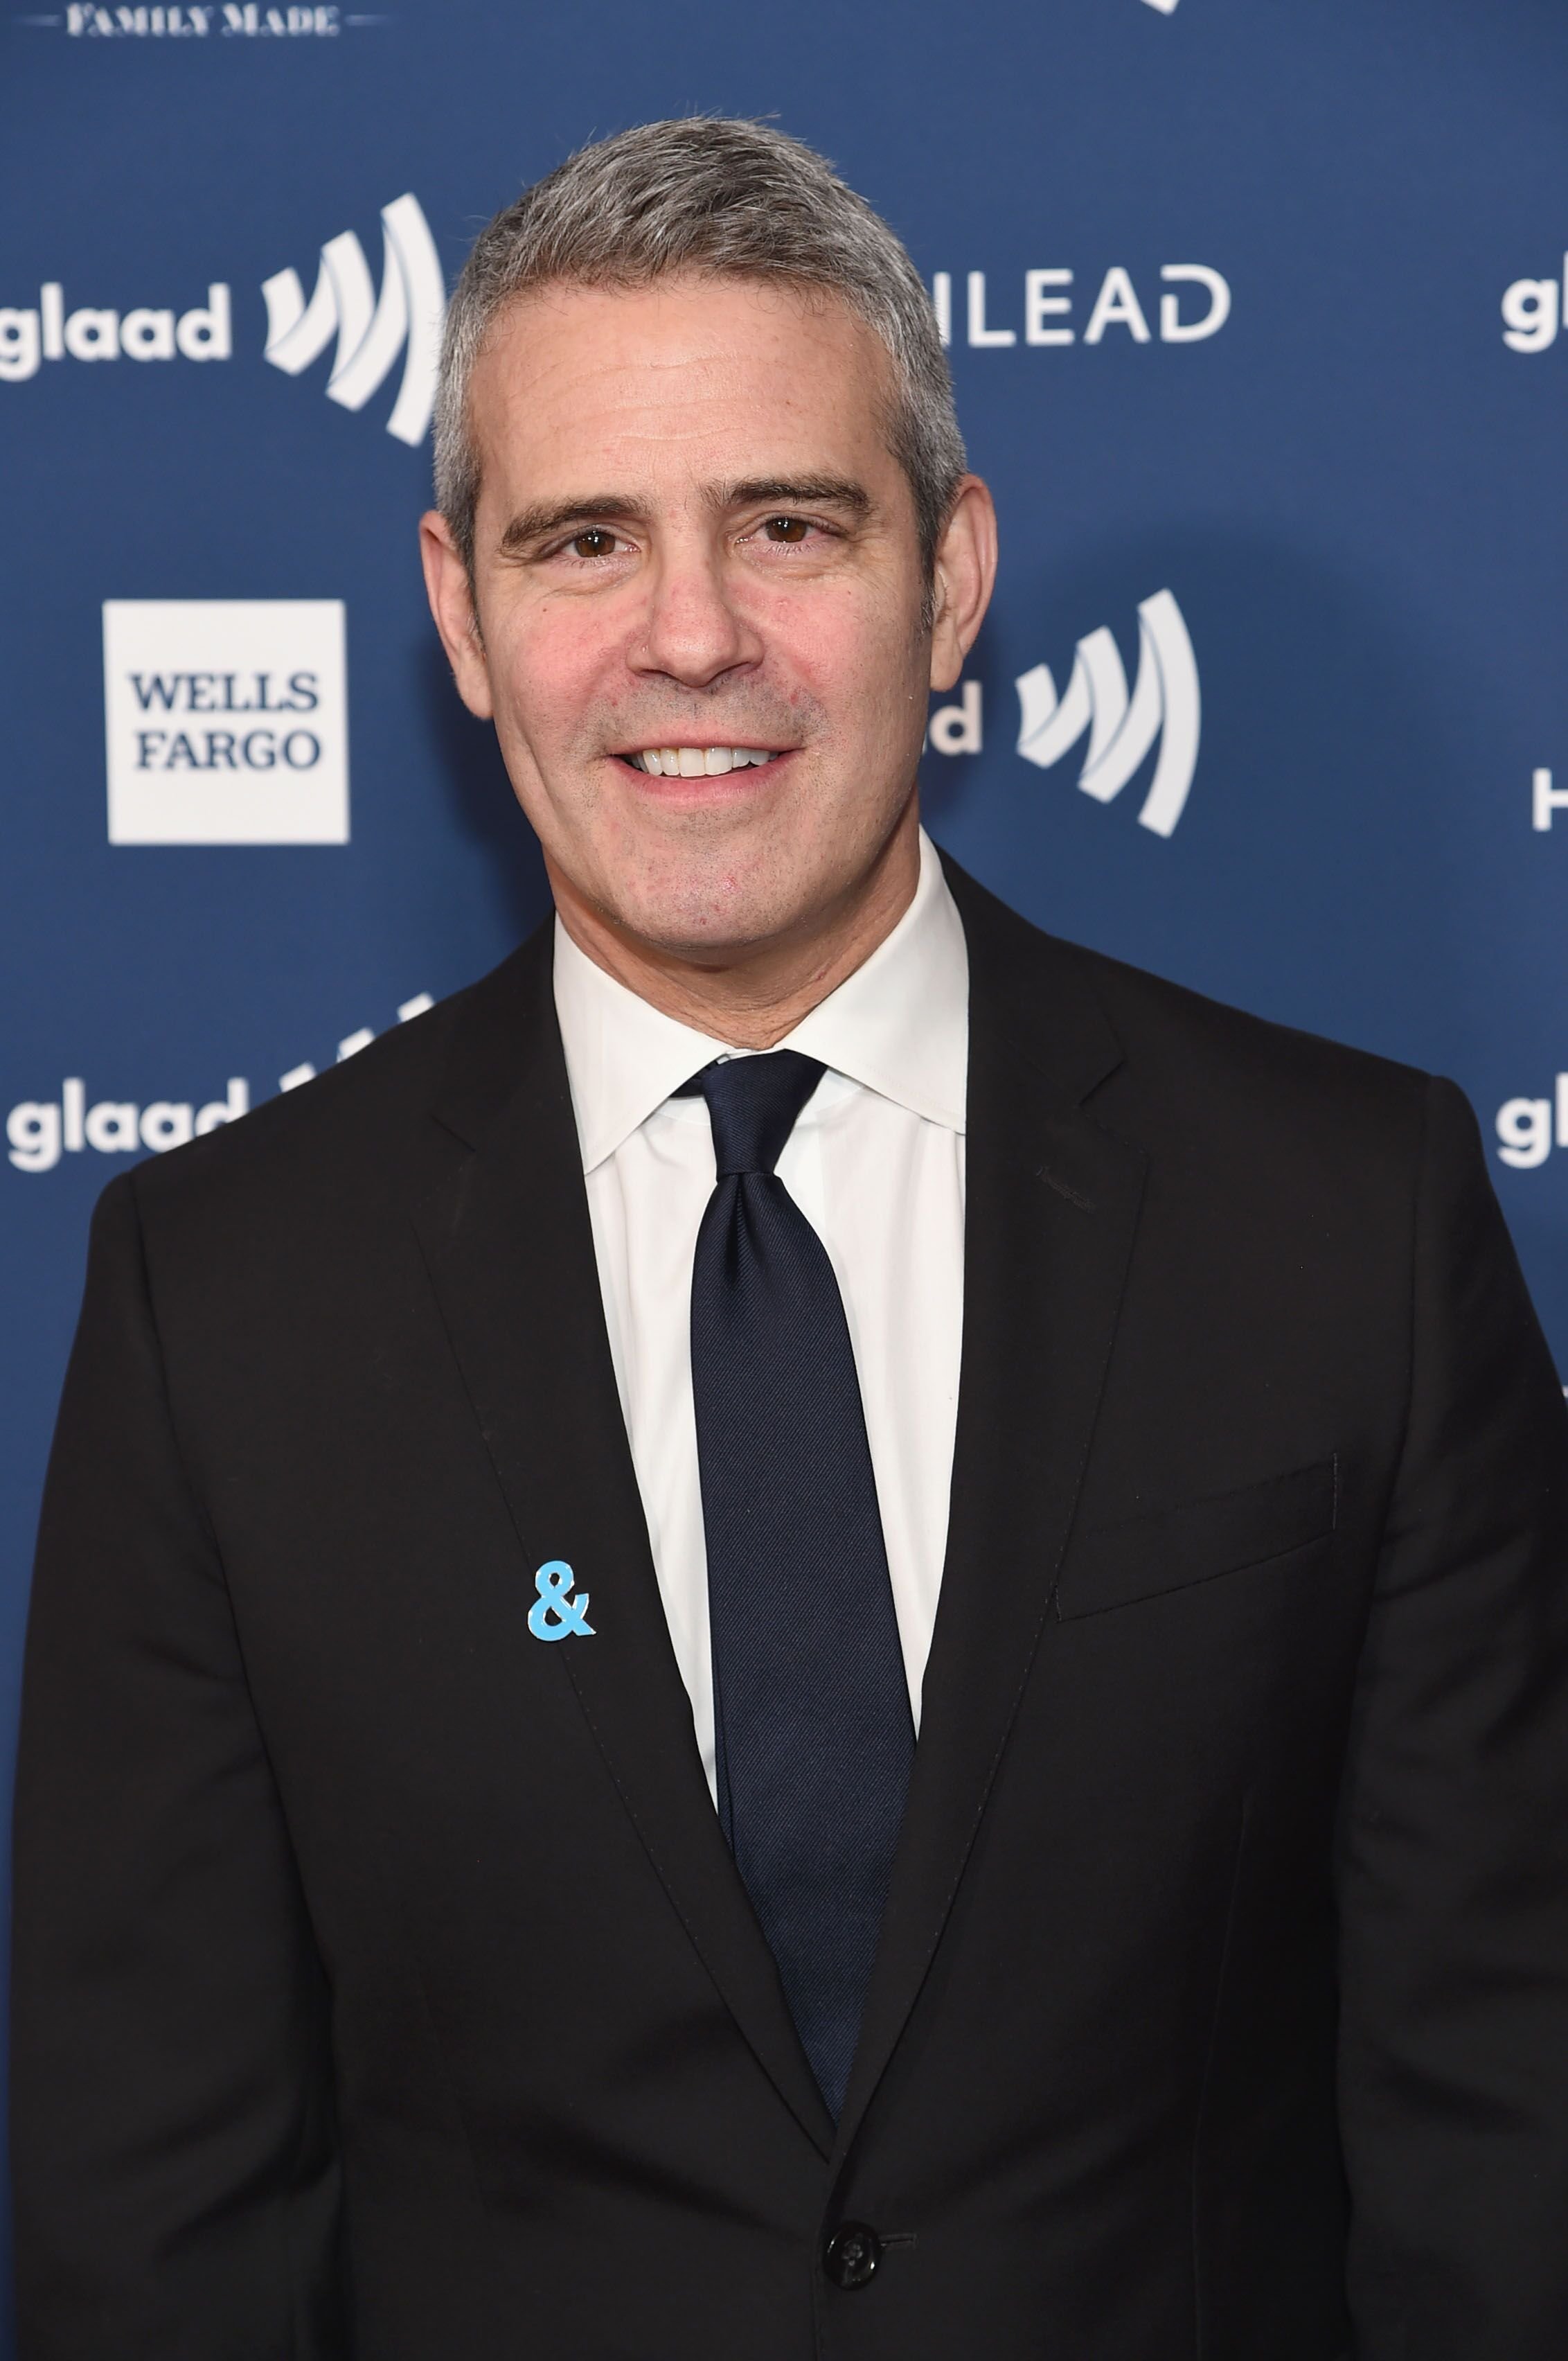 Andy Cohen at the 30th Annual GLAAD Media Awards New York on May 04, 2019 | Photo: Jamie McCarthy/Getty Images